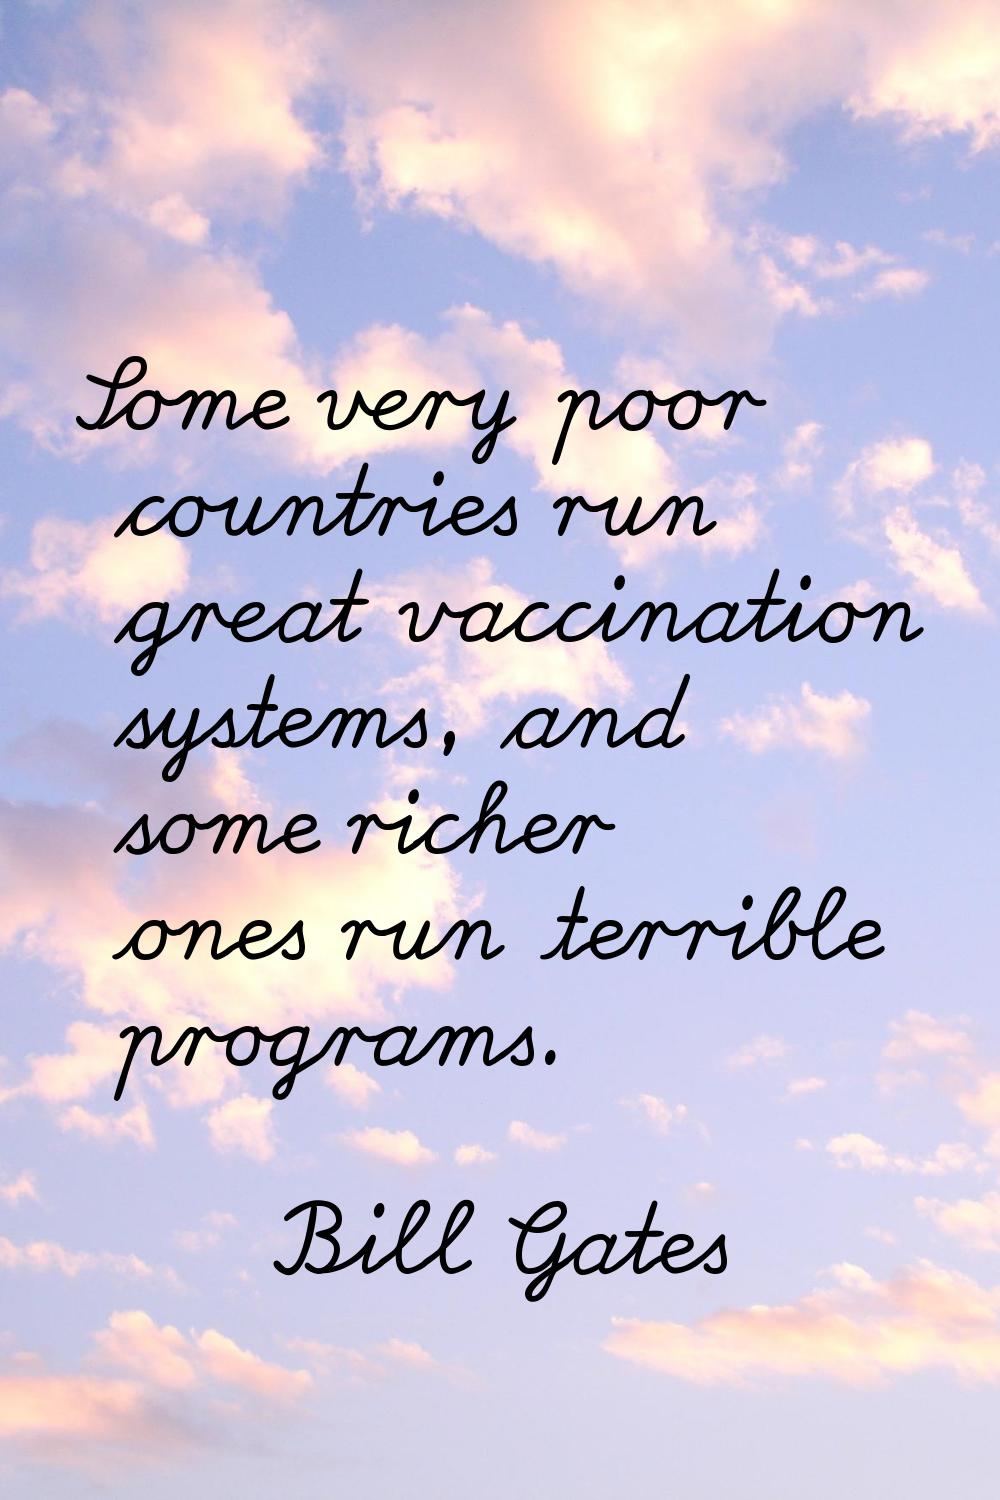 Some very poor countries run great vaccination systems, and some richer ones run terrible programs.